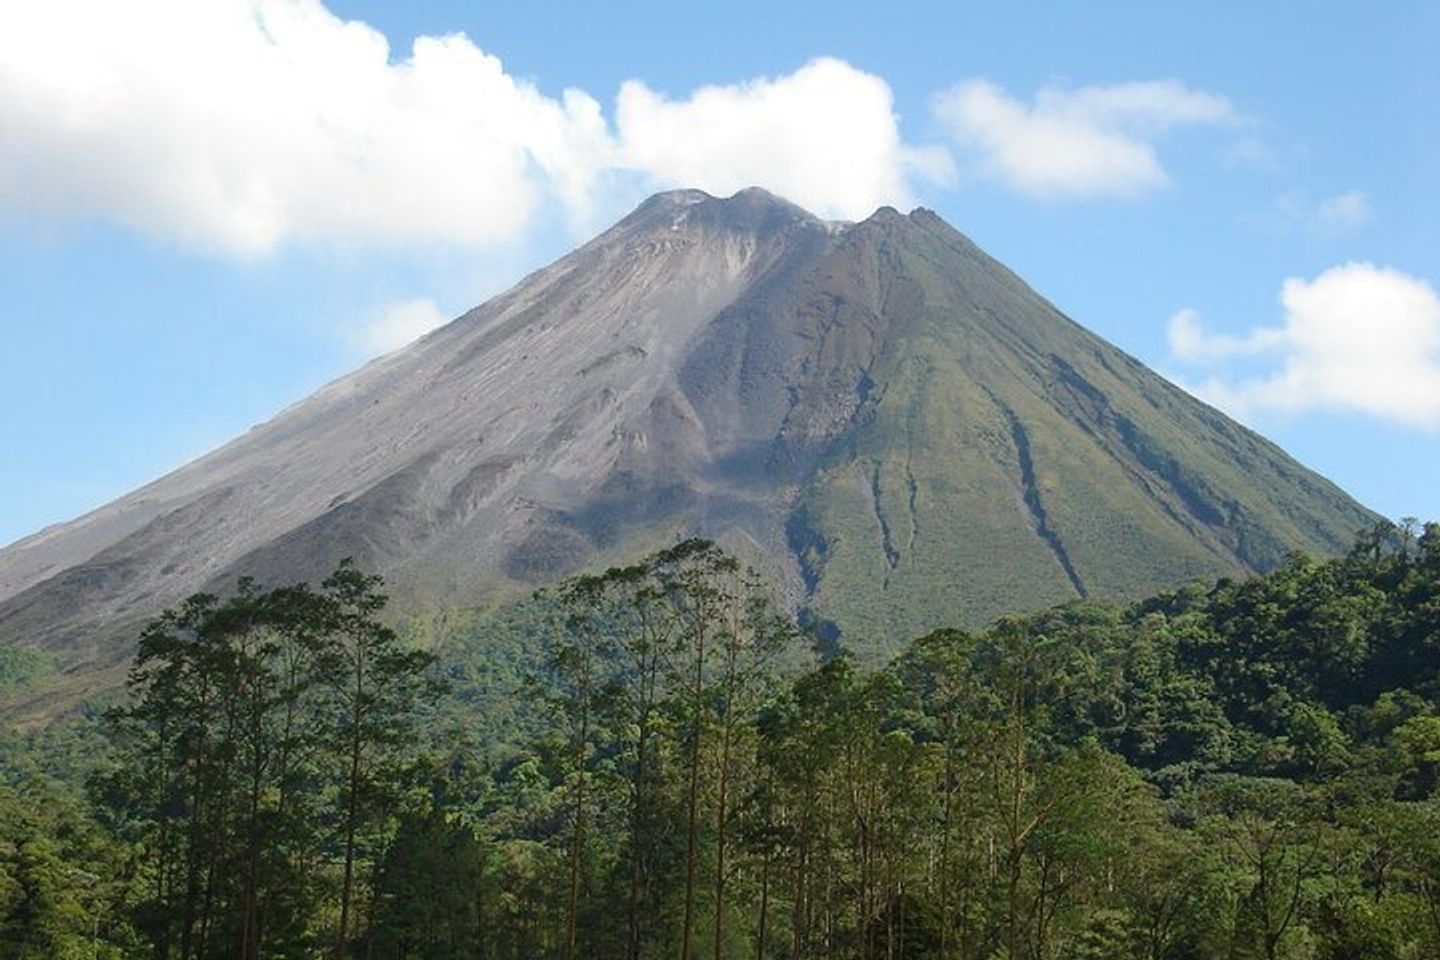 Take a hike up the nearby volcano